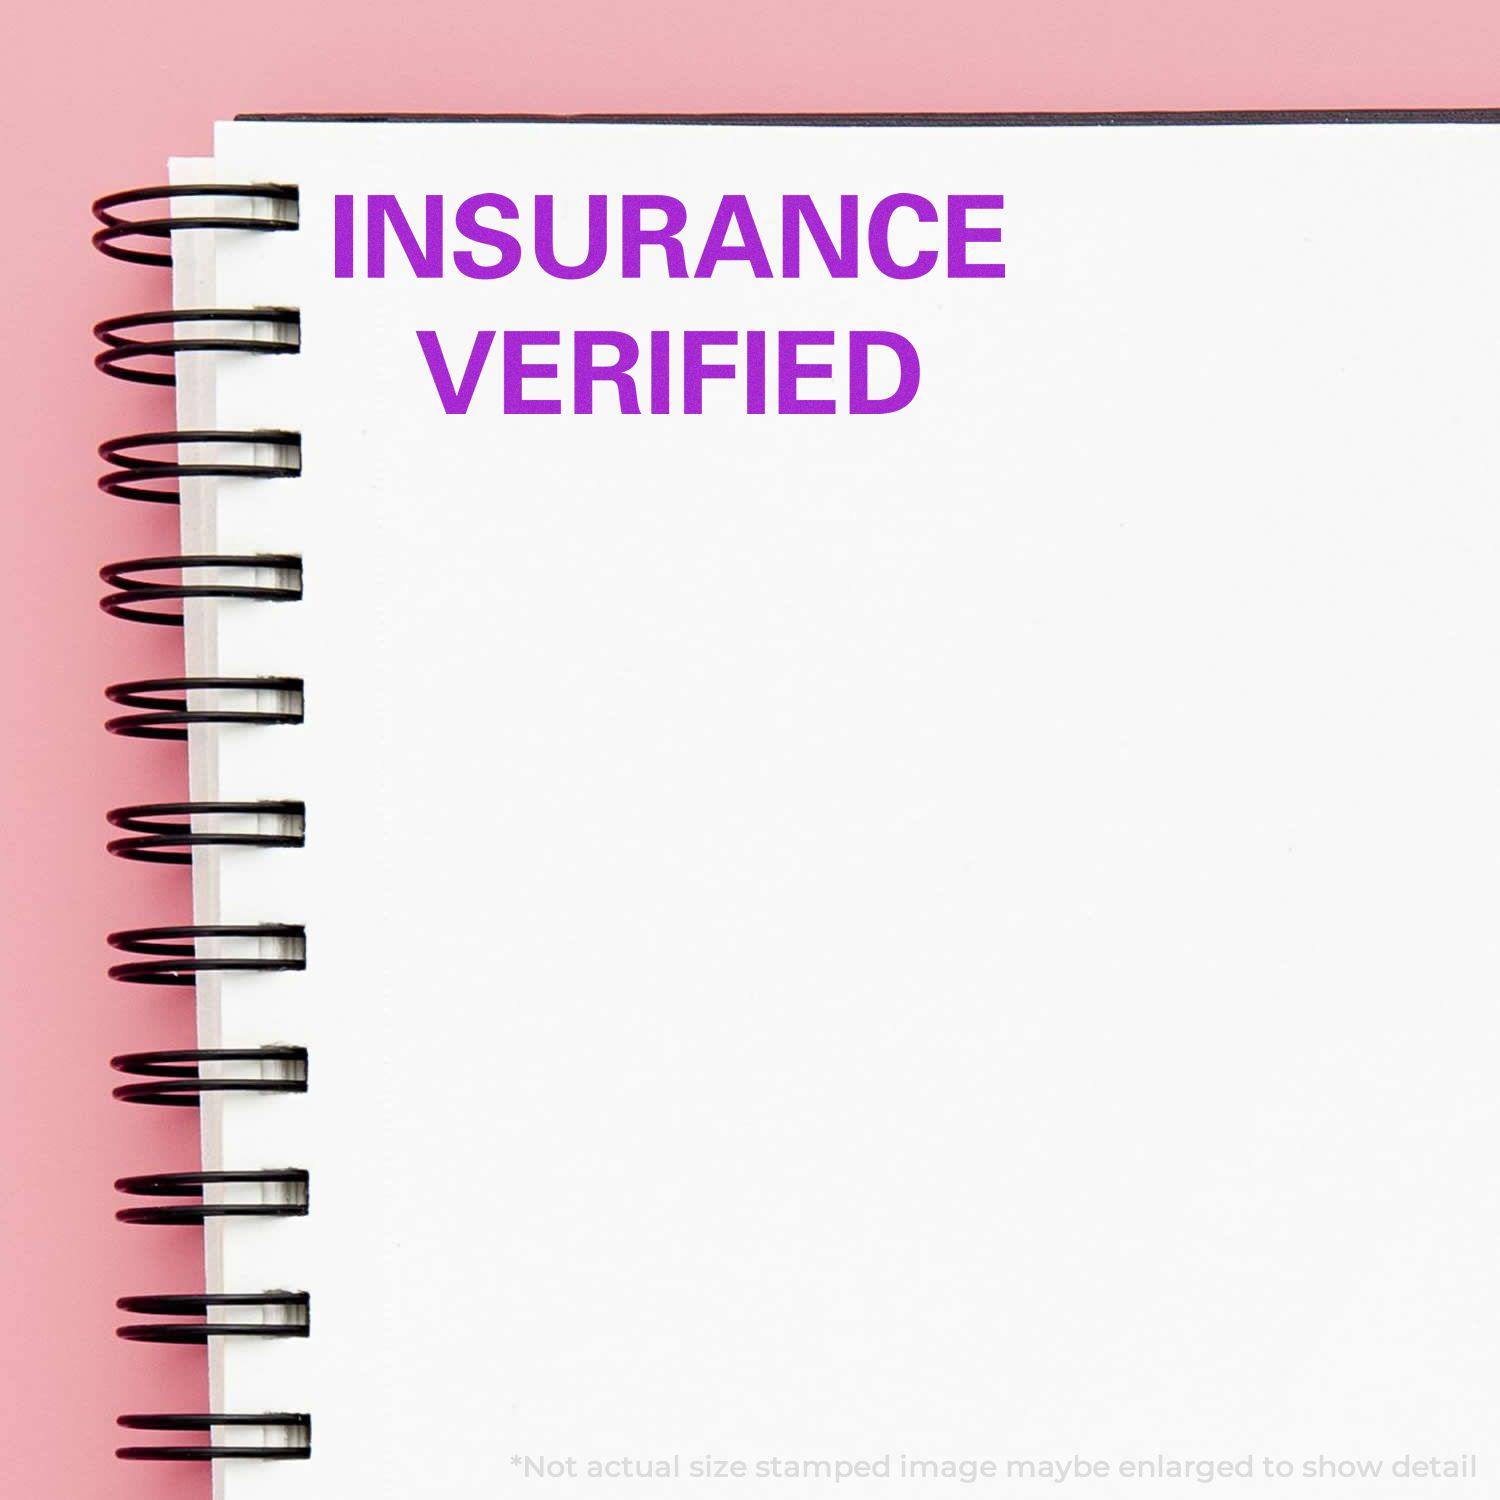 A stock office pre-inked stamp with a stamped image showing how the text "INSURANCE VERIFIED" is displayed after stamping.